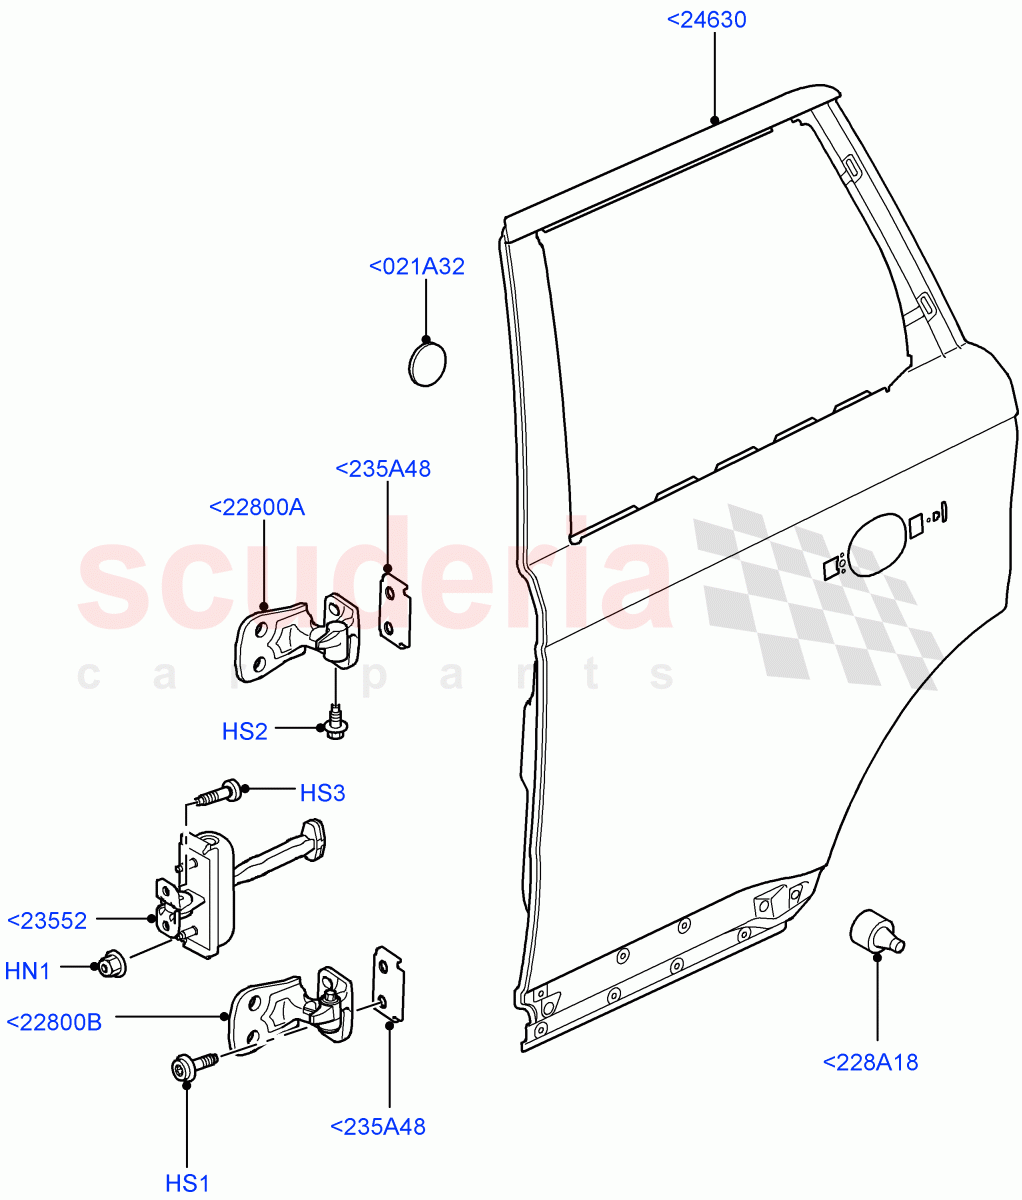 Rear Doors, Hinges & Weatherstrips(Door And Fixings)((V)FROMAA000001) of Land Rover Land Rover Range Rover Sport (2010-2013) [3.6 V8 32V DOHC EFI Diesel]